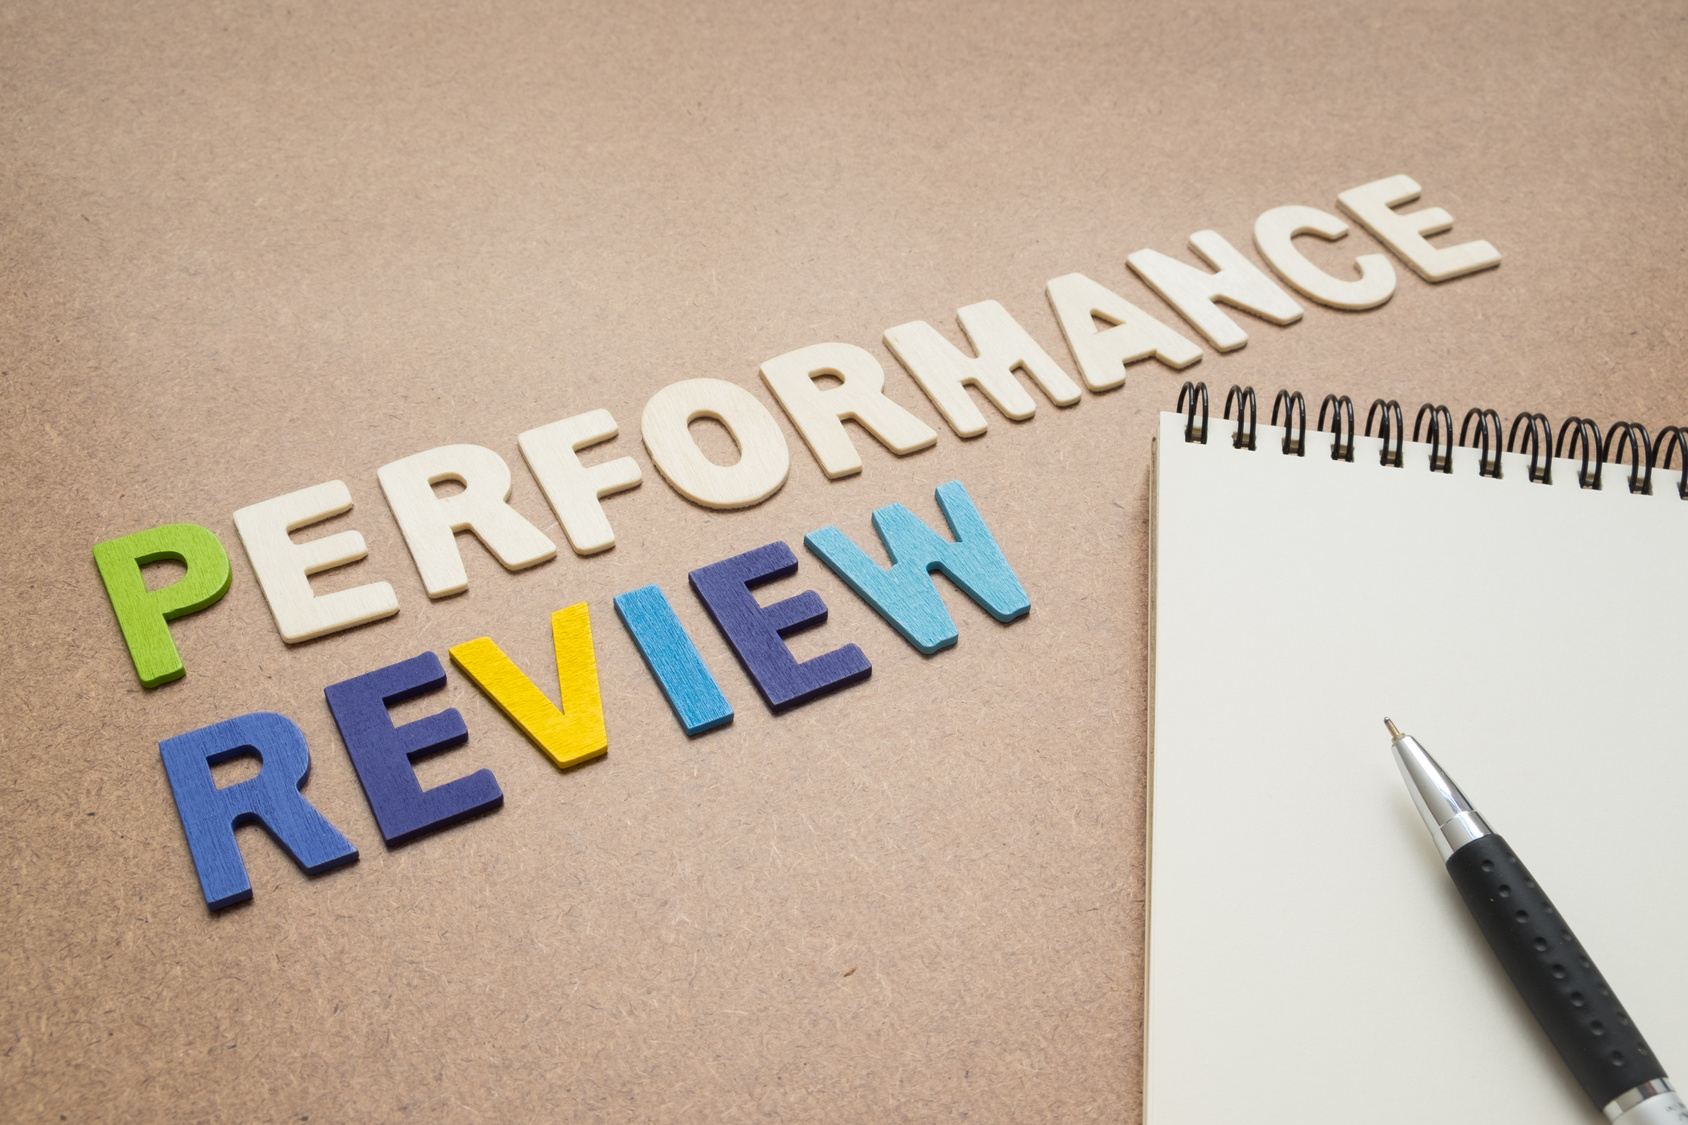 4 Types Of Questions That Make Performance Review Effective